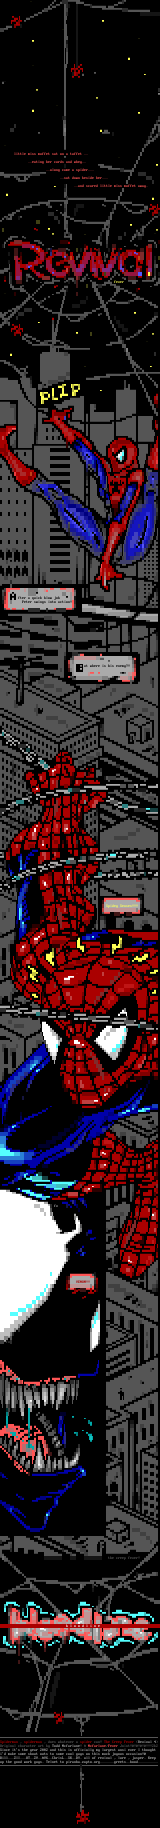 spider man by fever